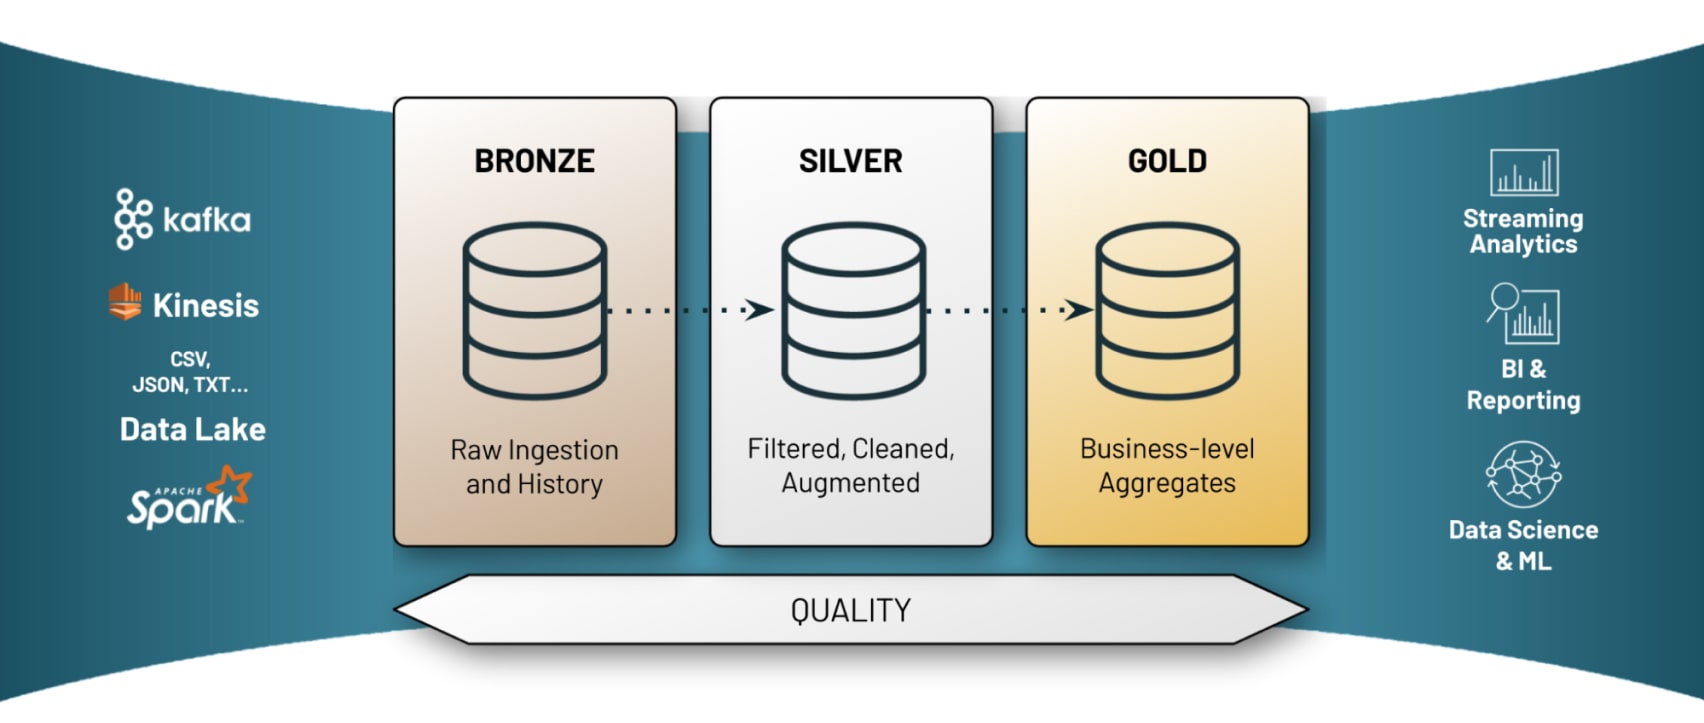 Lakehouse Architecture to segment data quality into raw, refined, and aggregated tiers